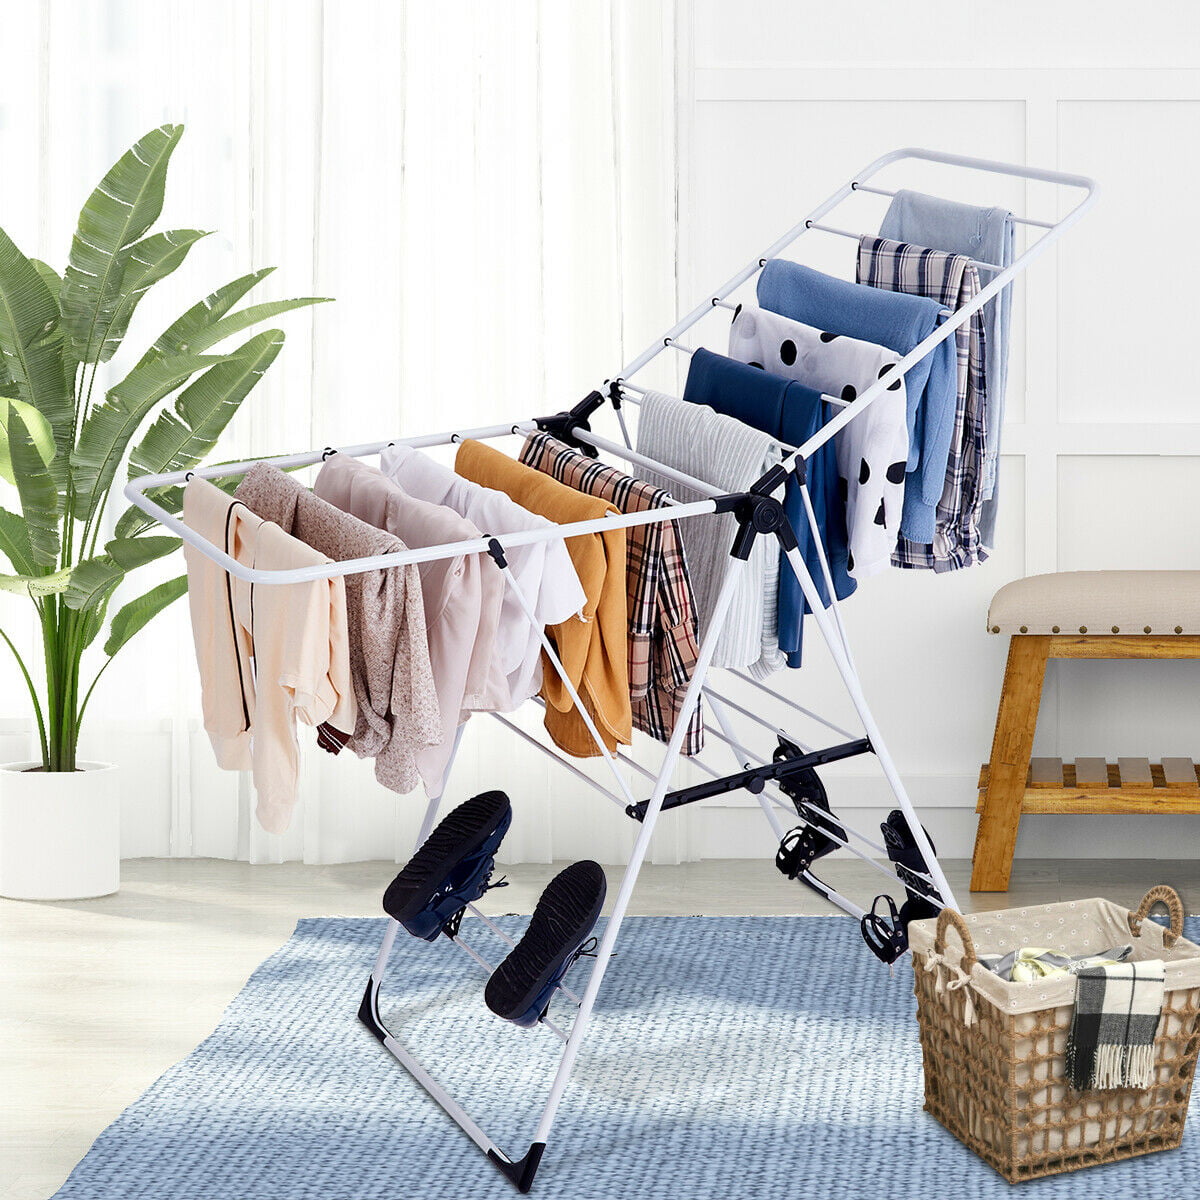 HWAJAN 90 Inches Folding Clothes Drying Rack Indoor Outdoor